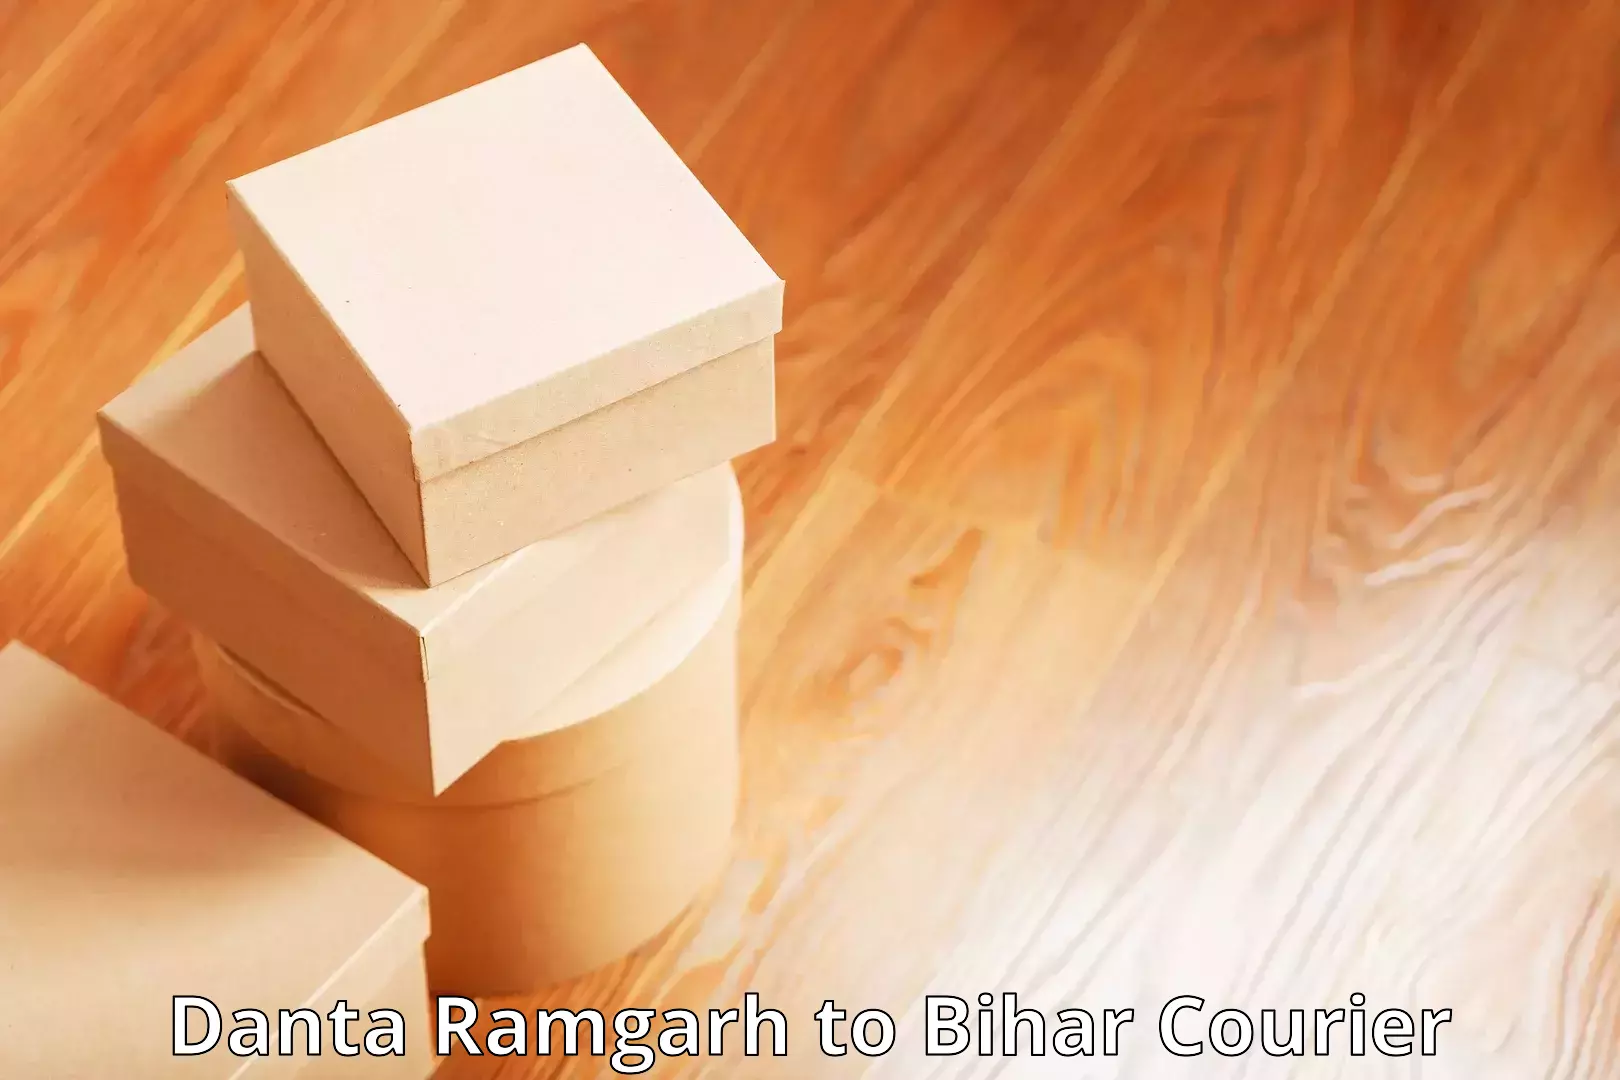 Express package services Danta Ramgarh to Bihar